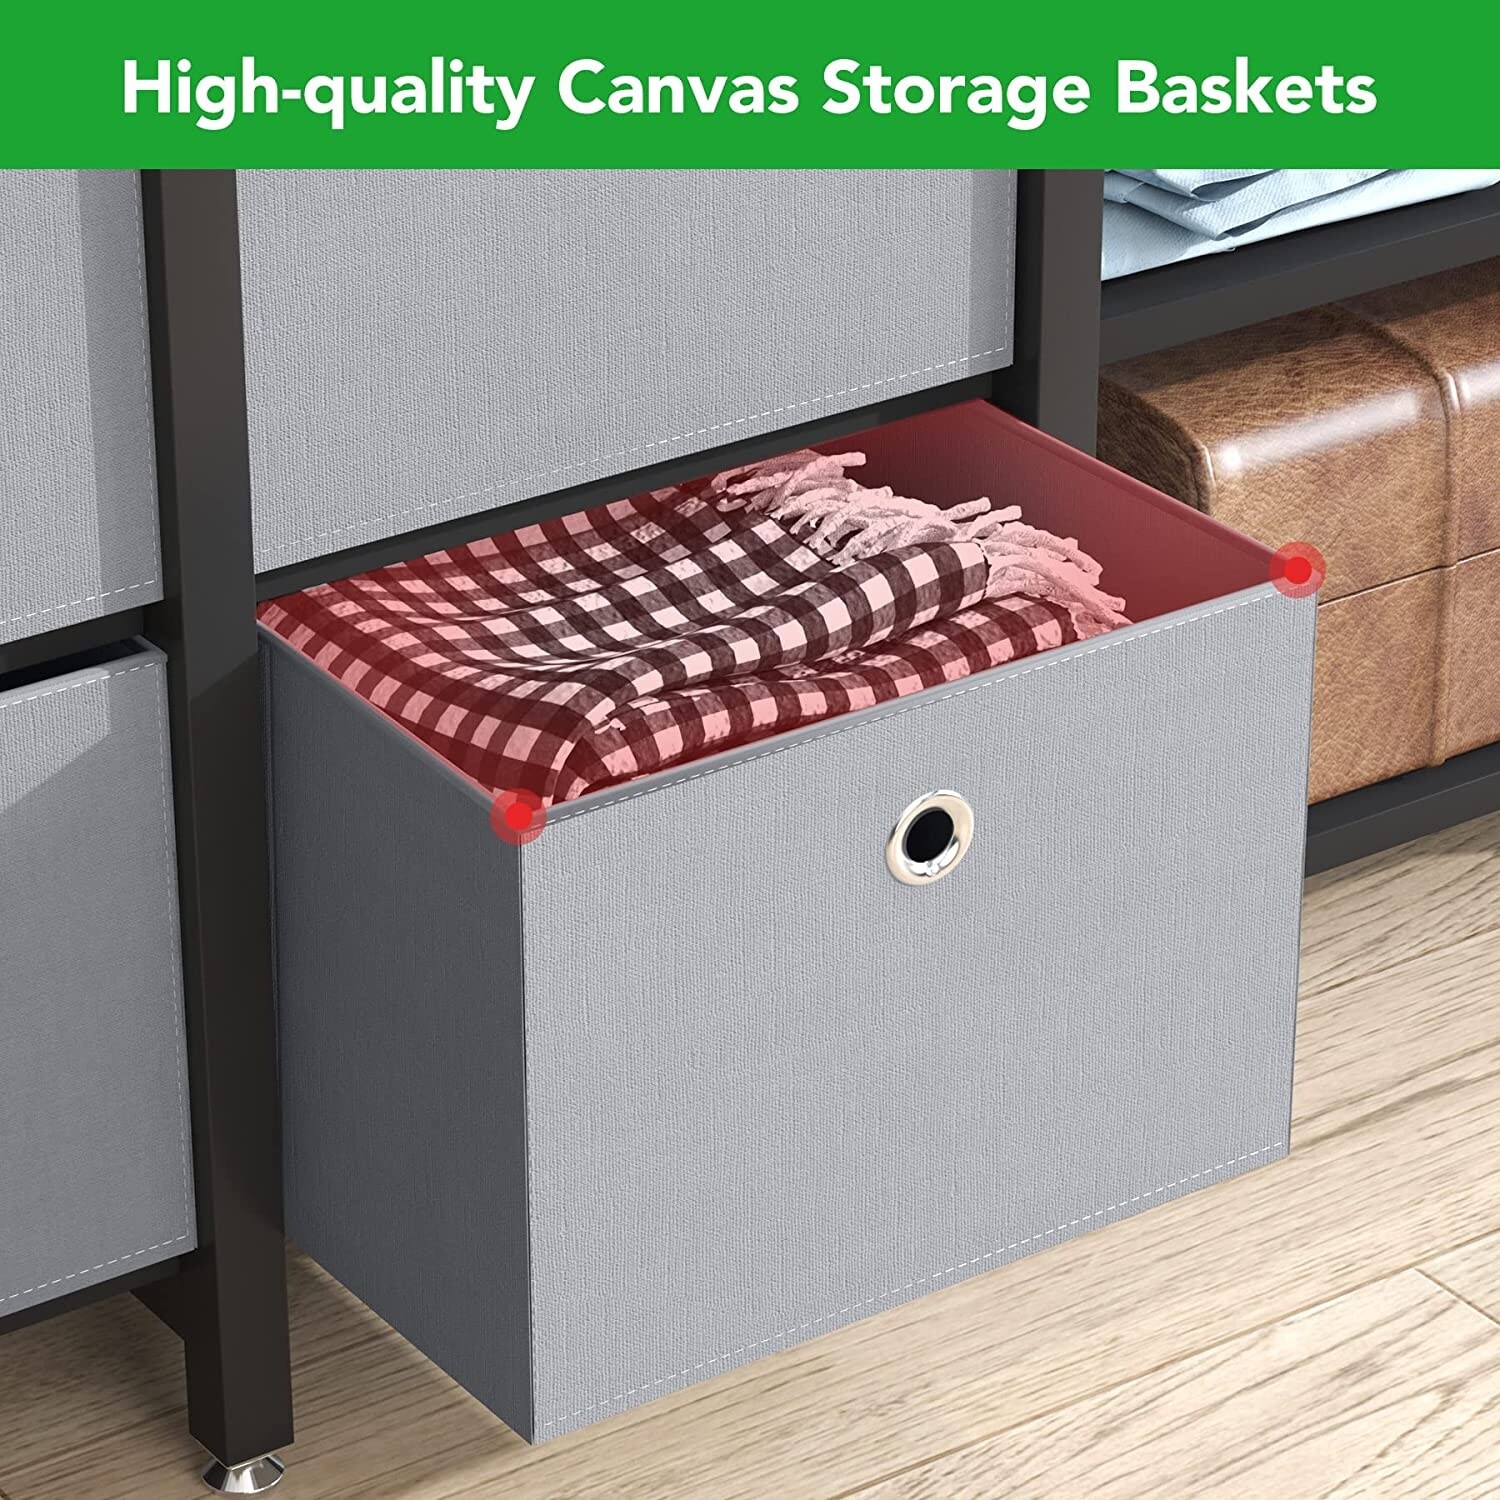 https://ak1.ostkcdn.com/images/products/is/images/direct/57717b3f72a19e7de4b63d91a8a784c32c7c1b67/Extra-Large-Closet-Organizer%2CFreestanding-Garment-Rack-with-Shelves-and-Hanging-Rods.jpg